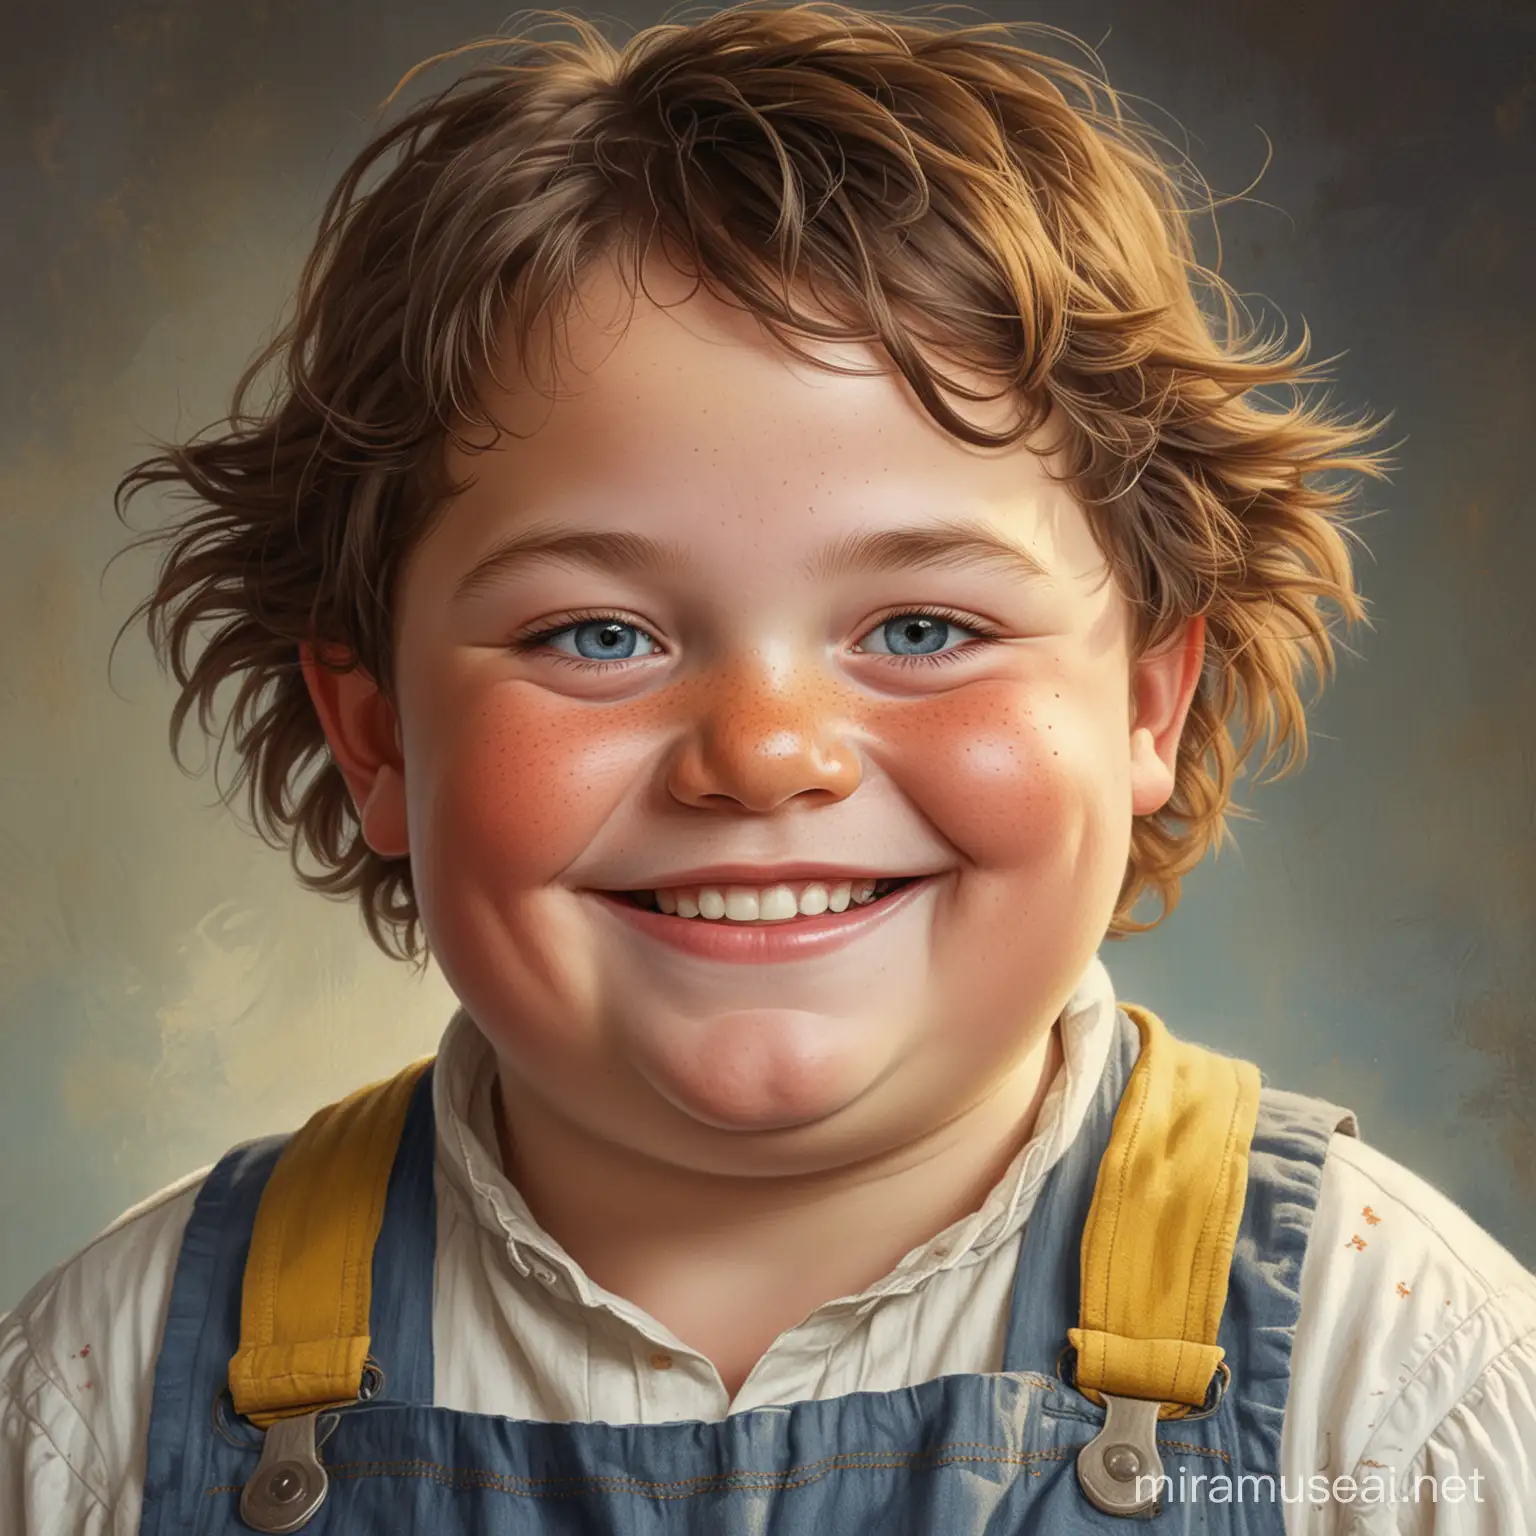 Very detailed illustration of a chubby, smiling seven year old peasant  boy,  with chubby face with red cheeks, freckles, blue eyes, chubby body, long messy dark hair, yellow teeth, wearing old-fashioned overalls